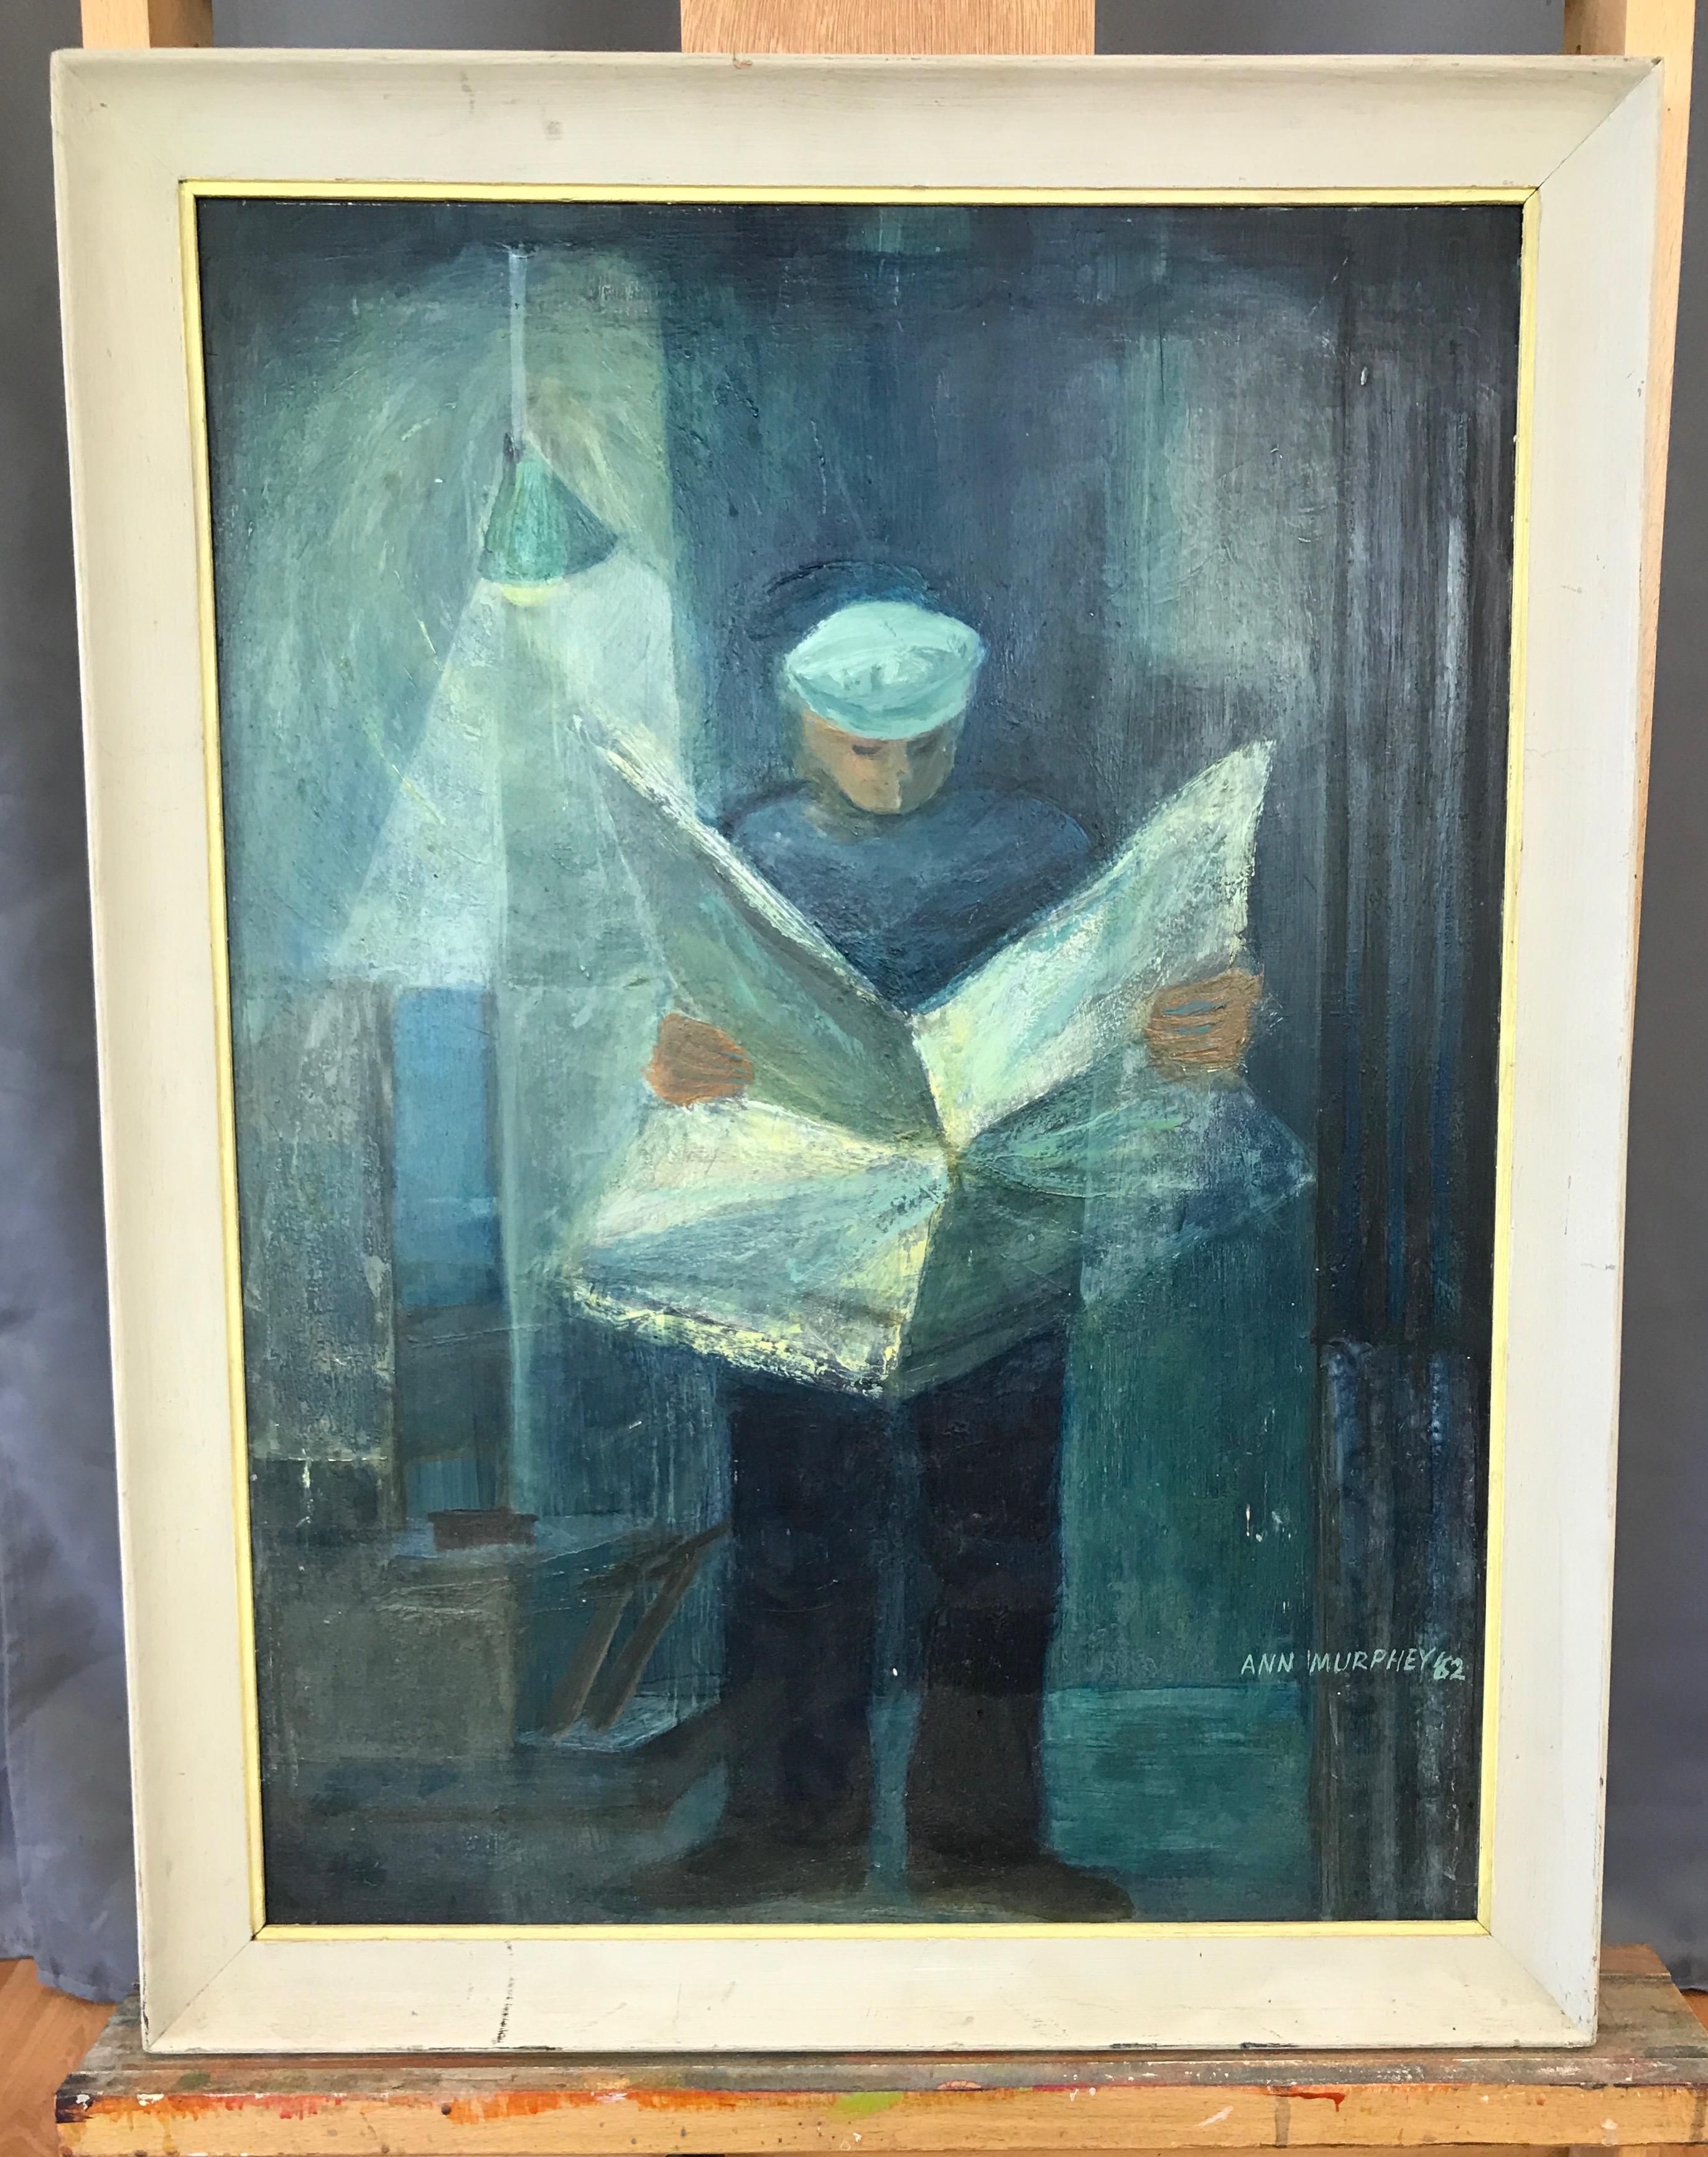 A very well executed and atmospheric midcentury framed Impressionist oil painting on beaverboard titled “The Shoe Shine Man”, by California artist and UC-Berkeley educator Ann Murphey.

Moody blue portrait of a sidewalk shoe shine guy perusing a